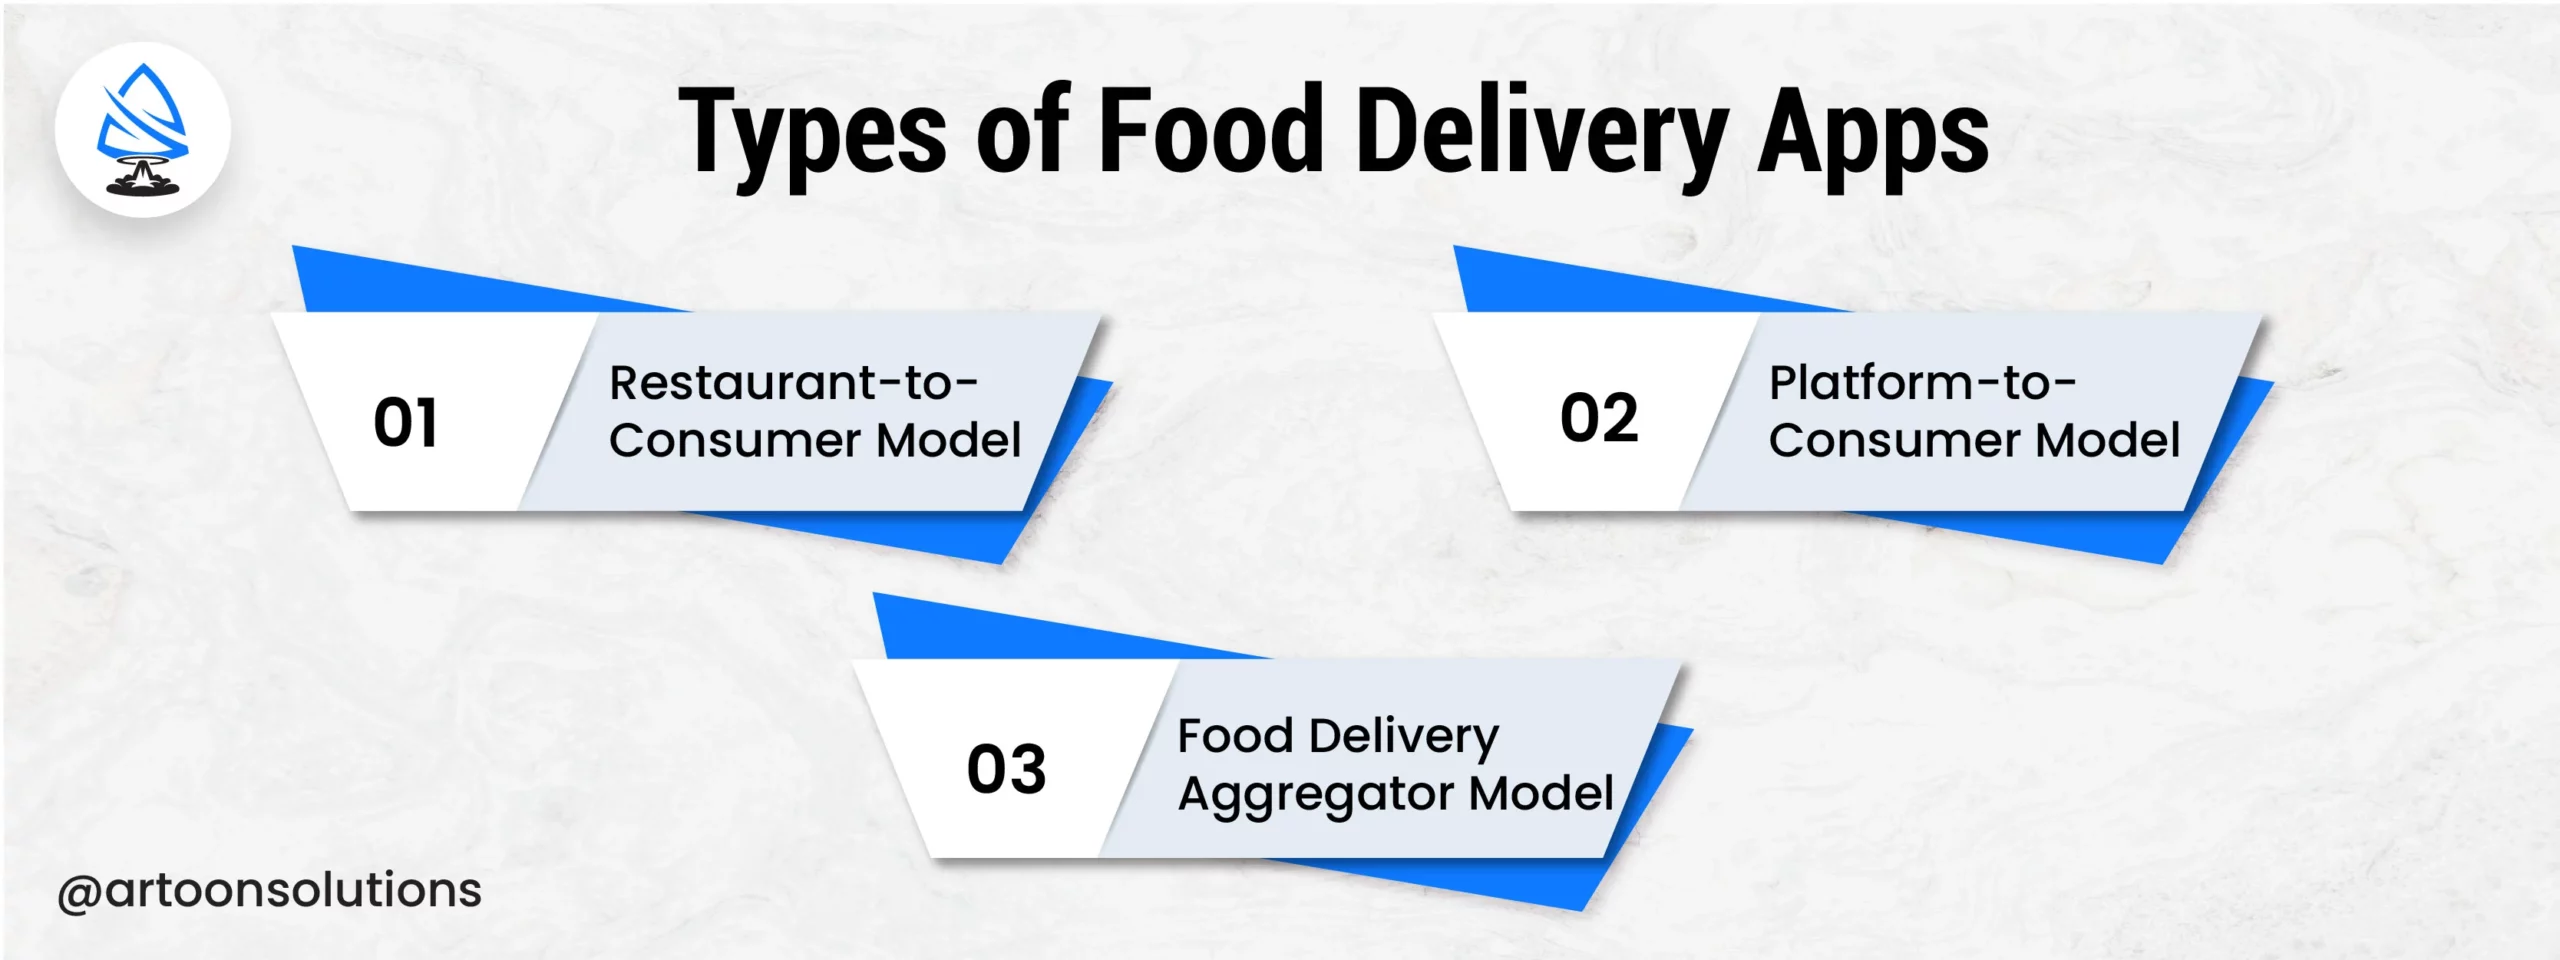 2. TYPES OF FOOD DELIVERY APPS